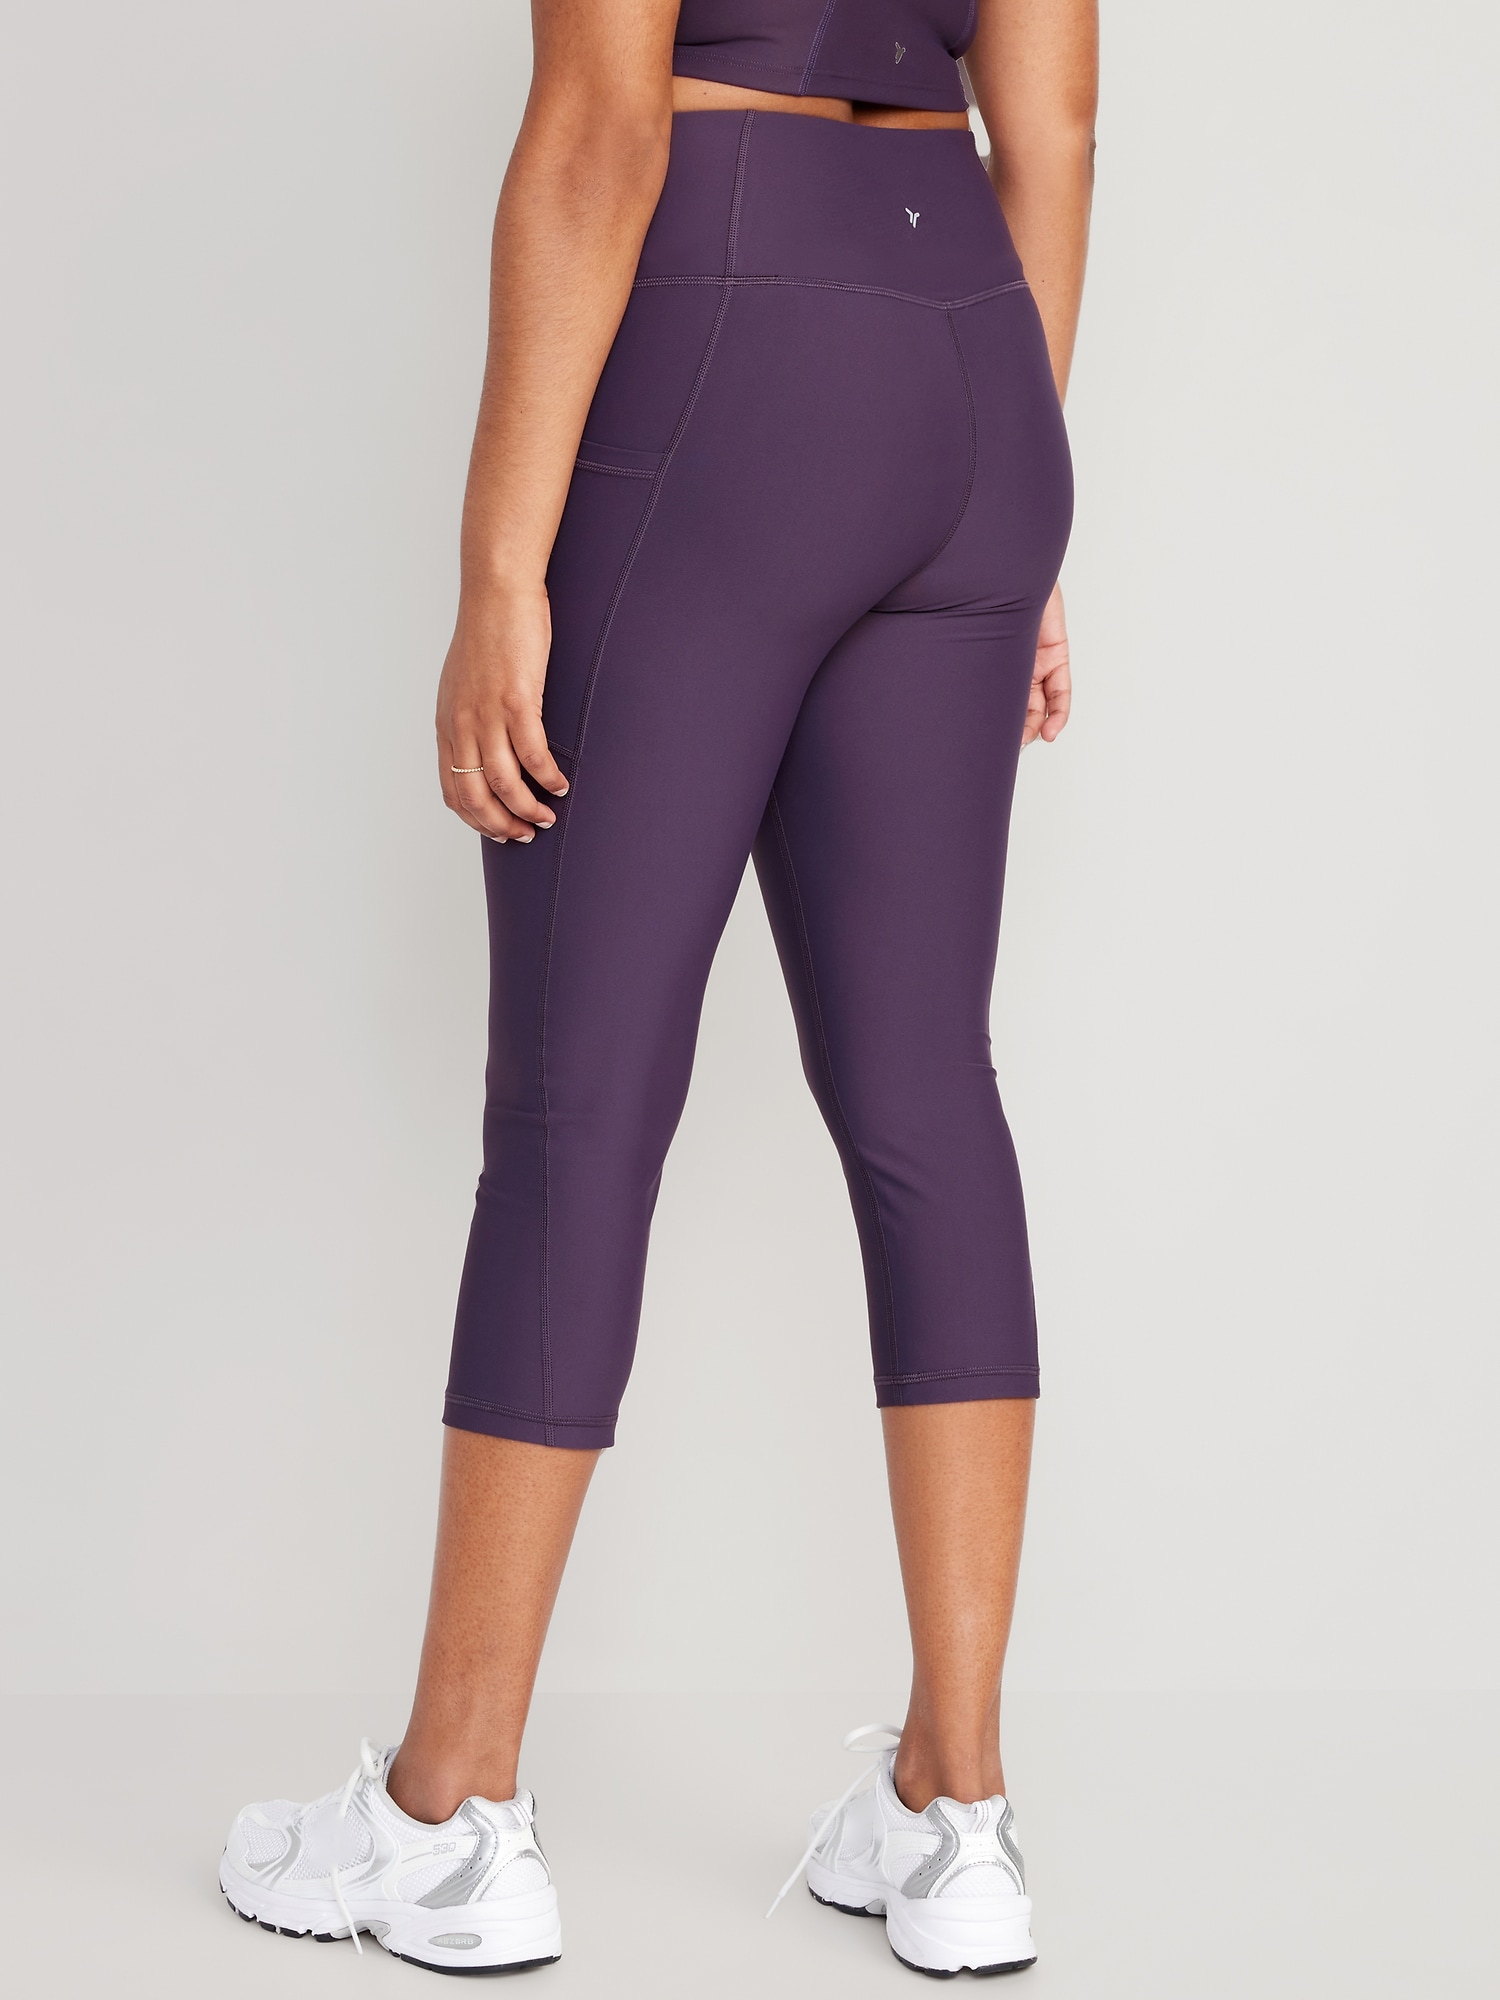 Lululemon Fast and Free Crop II 19 *Non-Reflective - Heritage 365